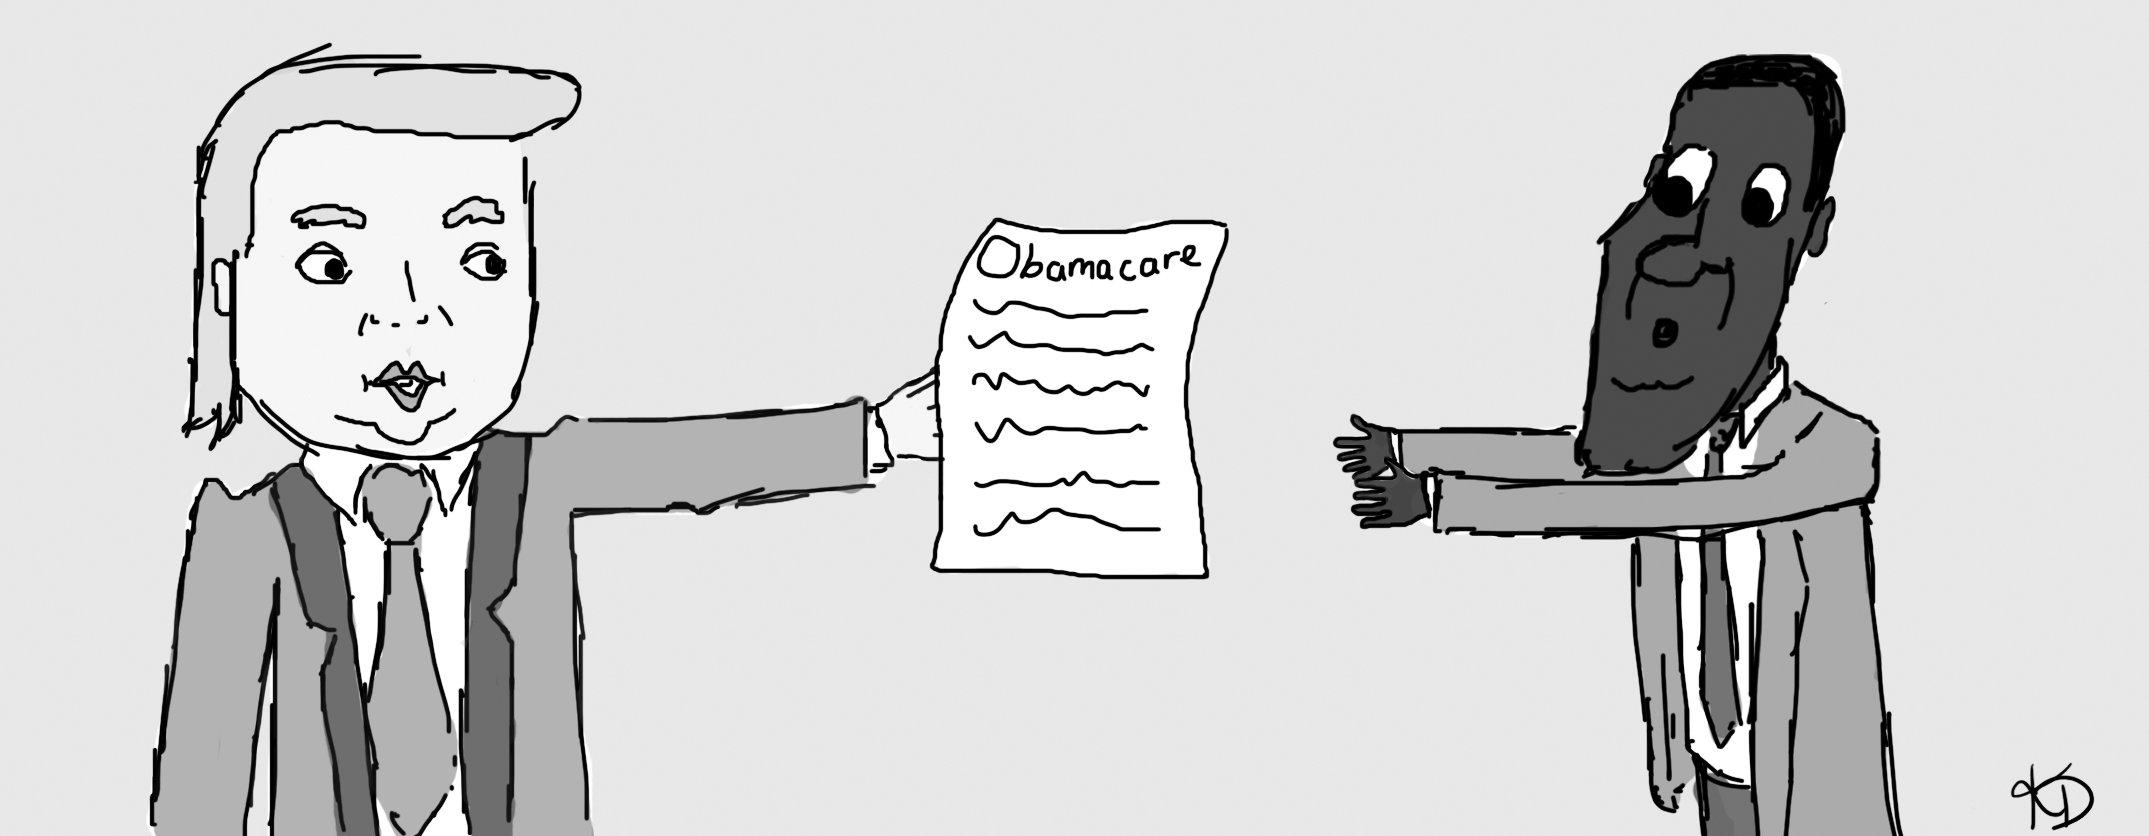 Government should reconsider repeal of Obamacare